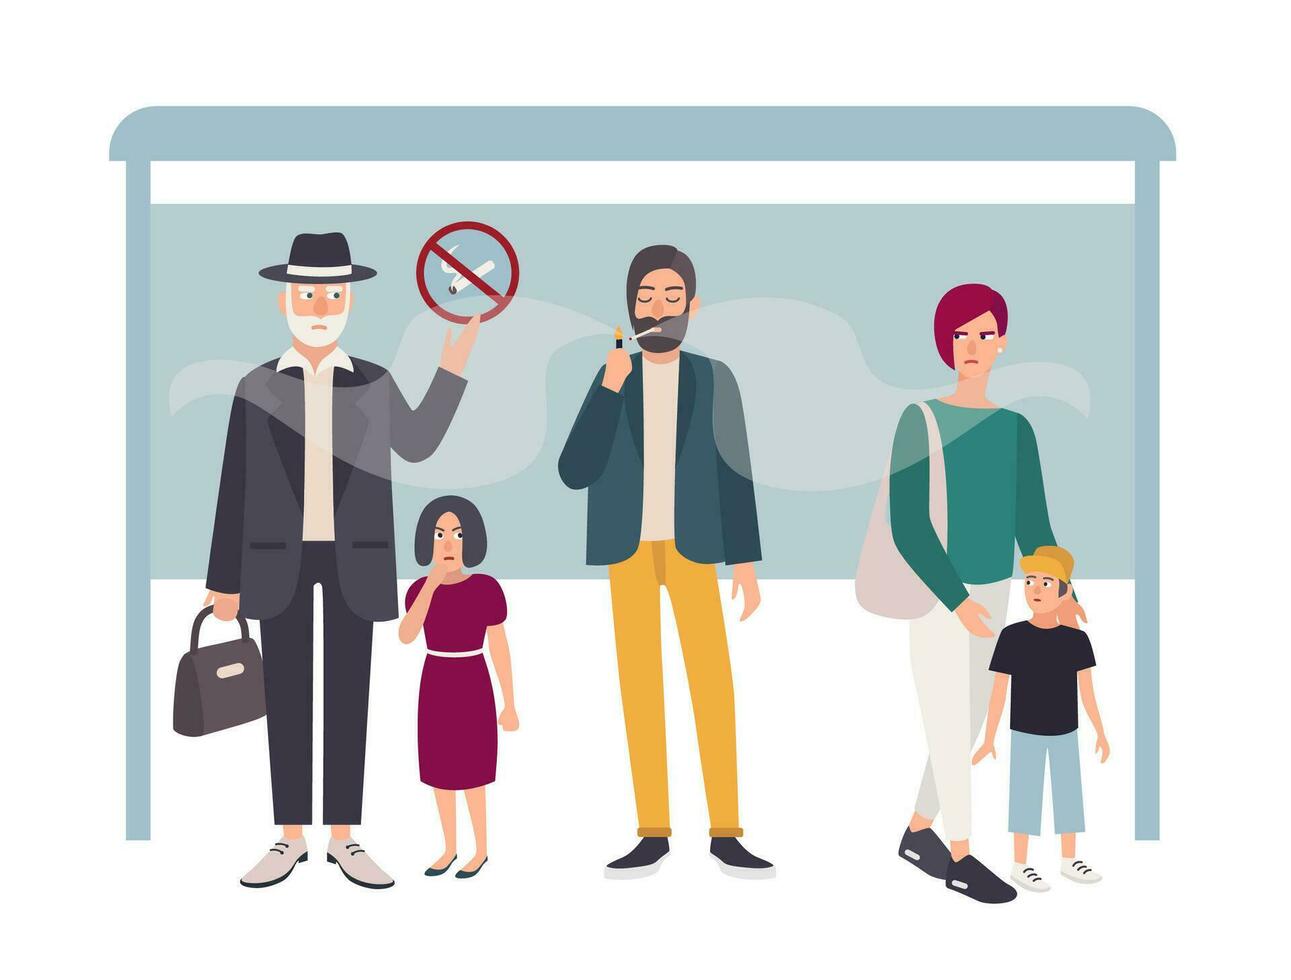 Passive smoking concept. Man smokes at a bus stop near non smoking people. Colorful vector illustration in flat style.